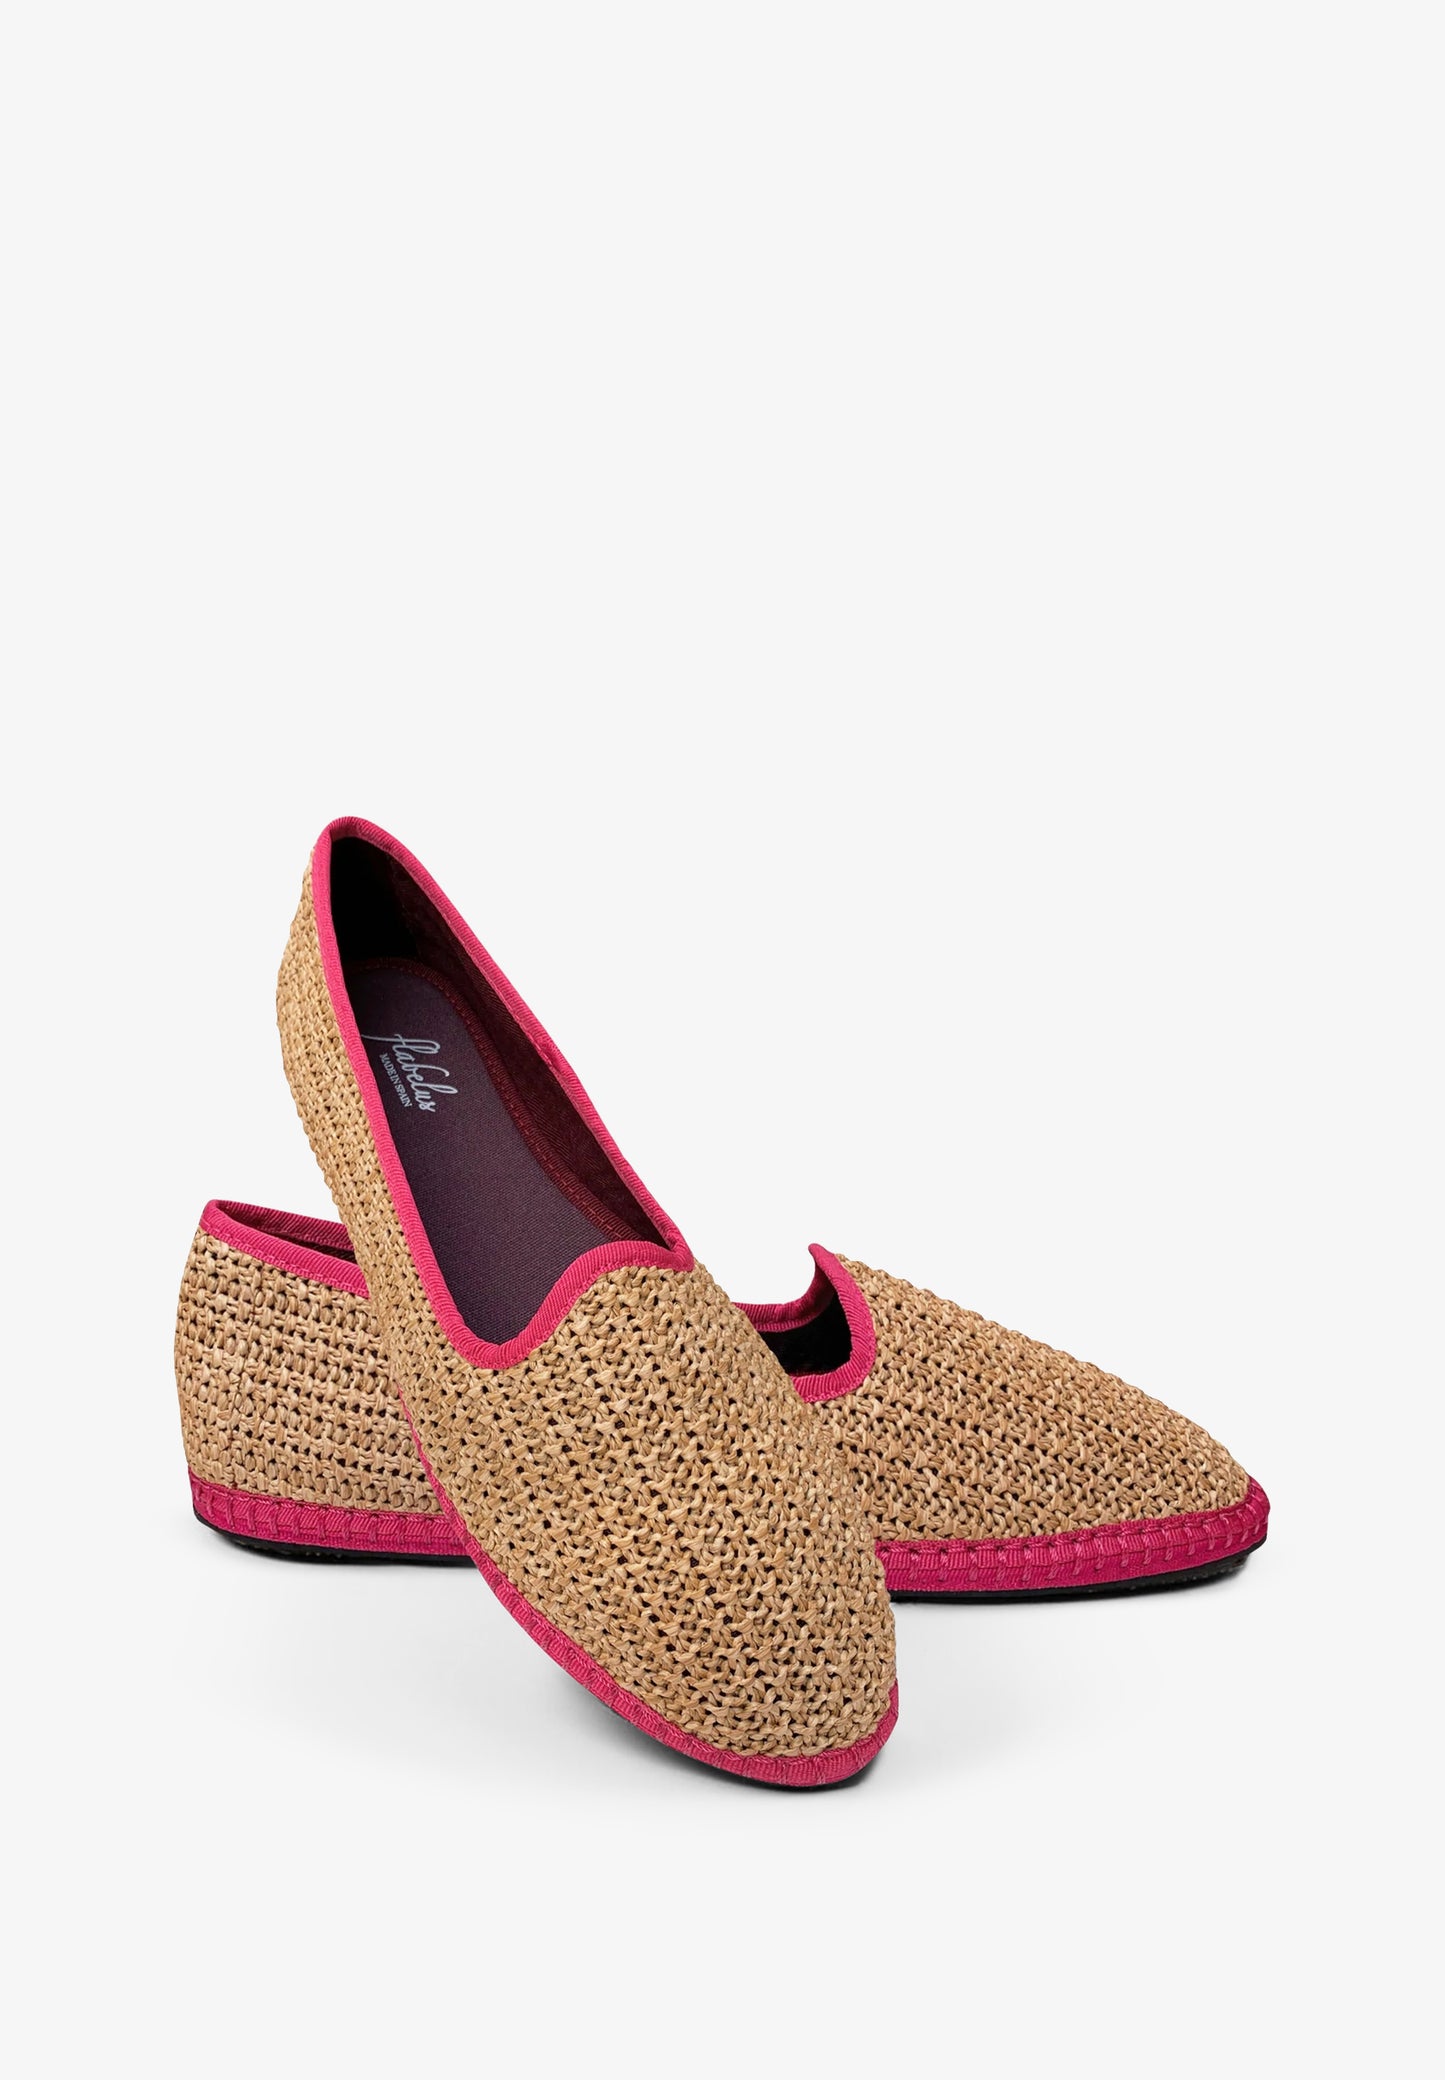 FLABELUS | SLIPPERS BRIONY